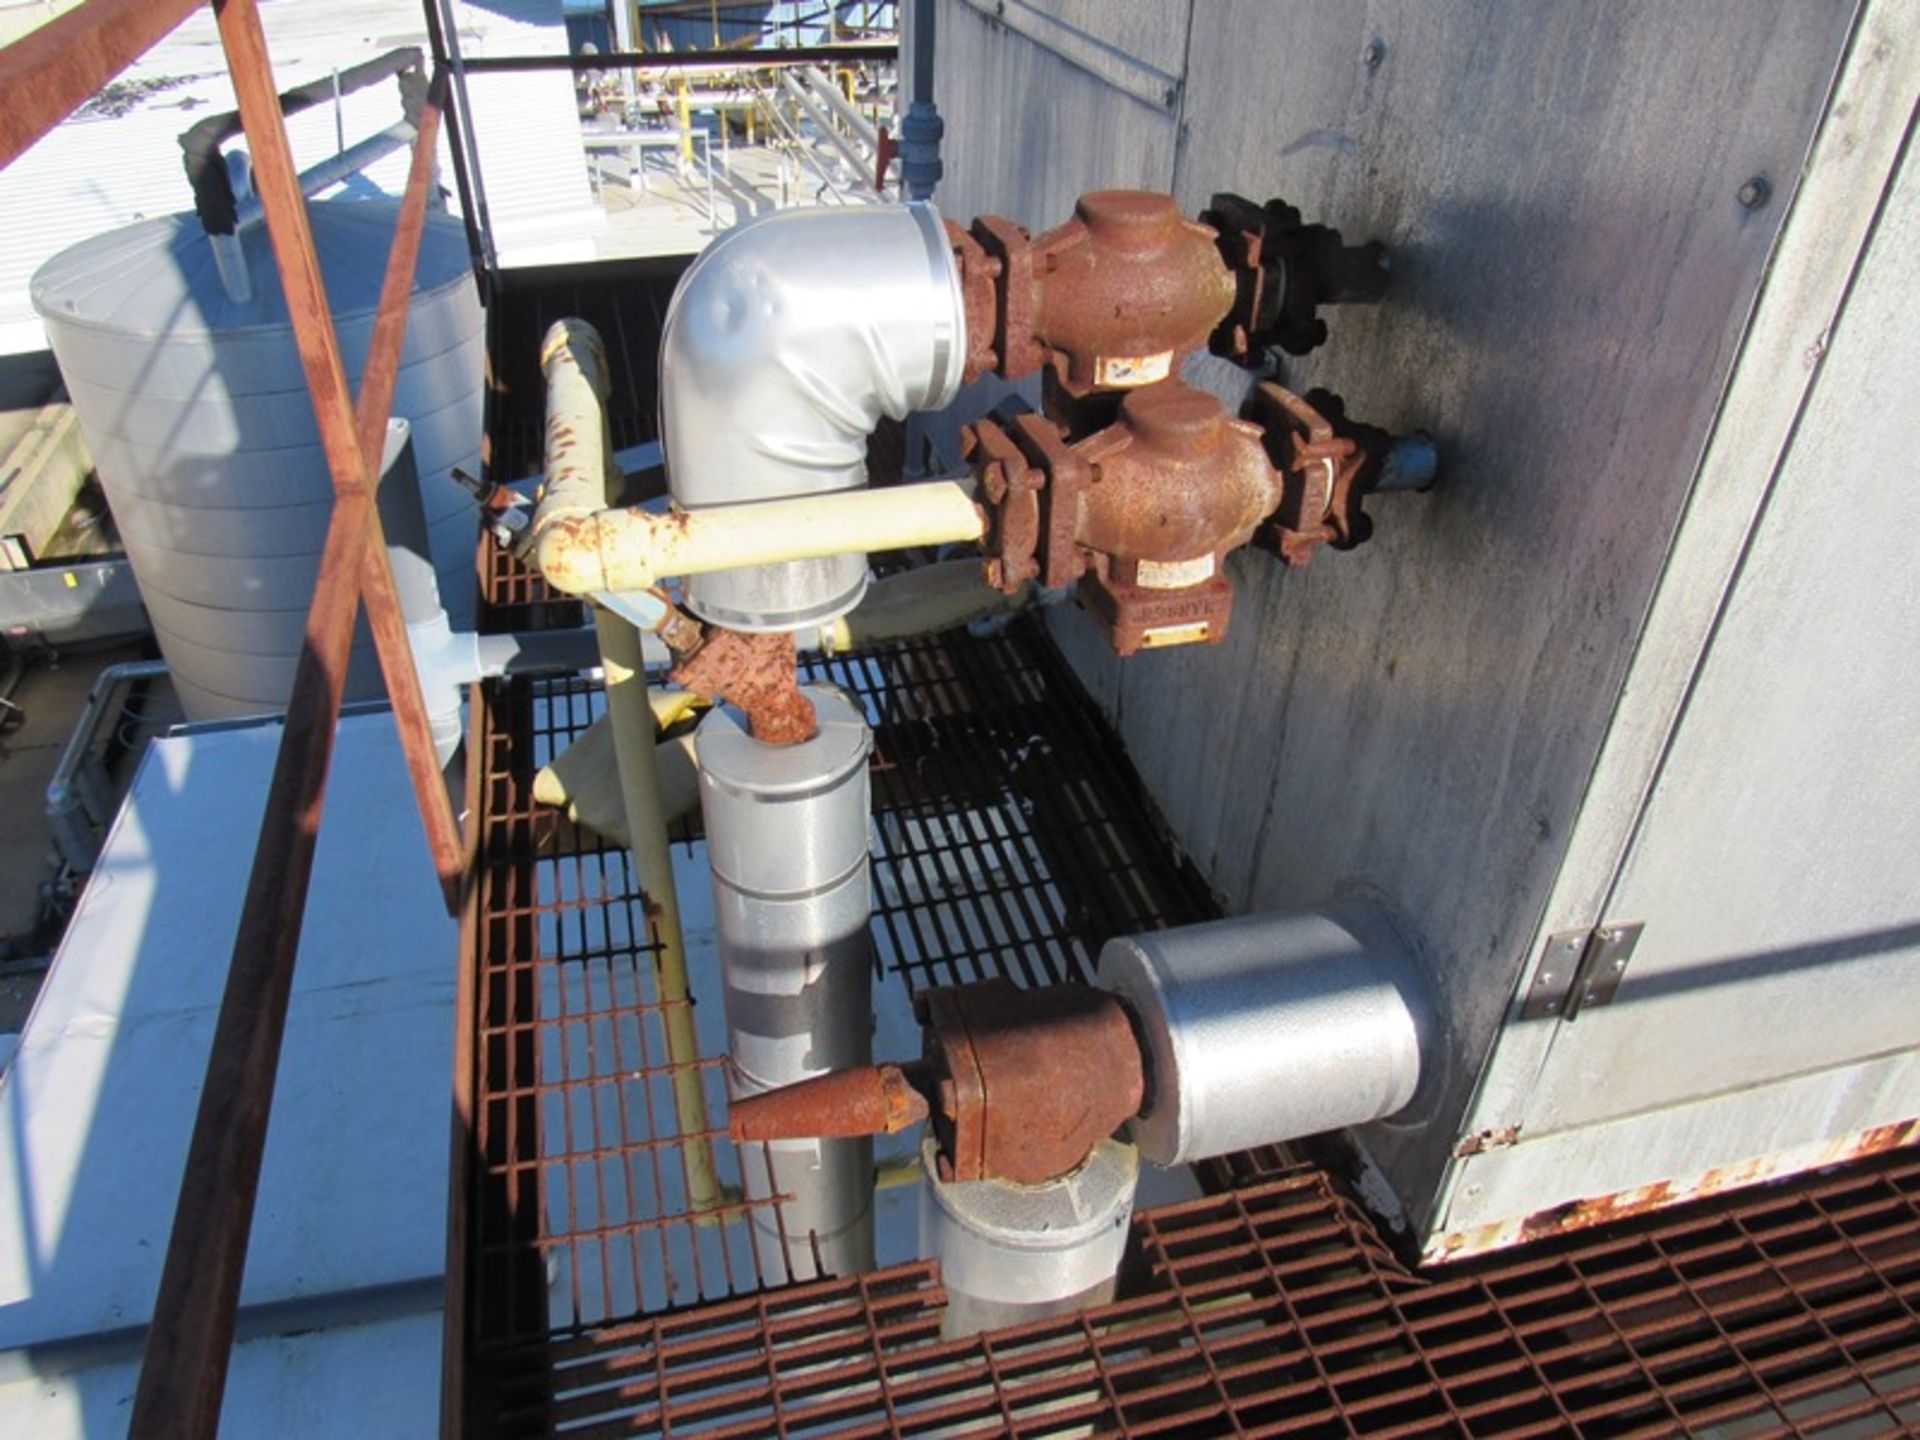 Turbo Mdl. Tigar 36-20 Ammonia Plate Chiller, Ser. #E022030, on roof top structure, 21 plates in - Image 4 of 9